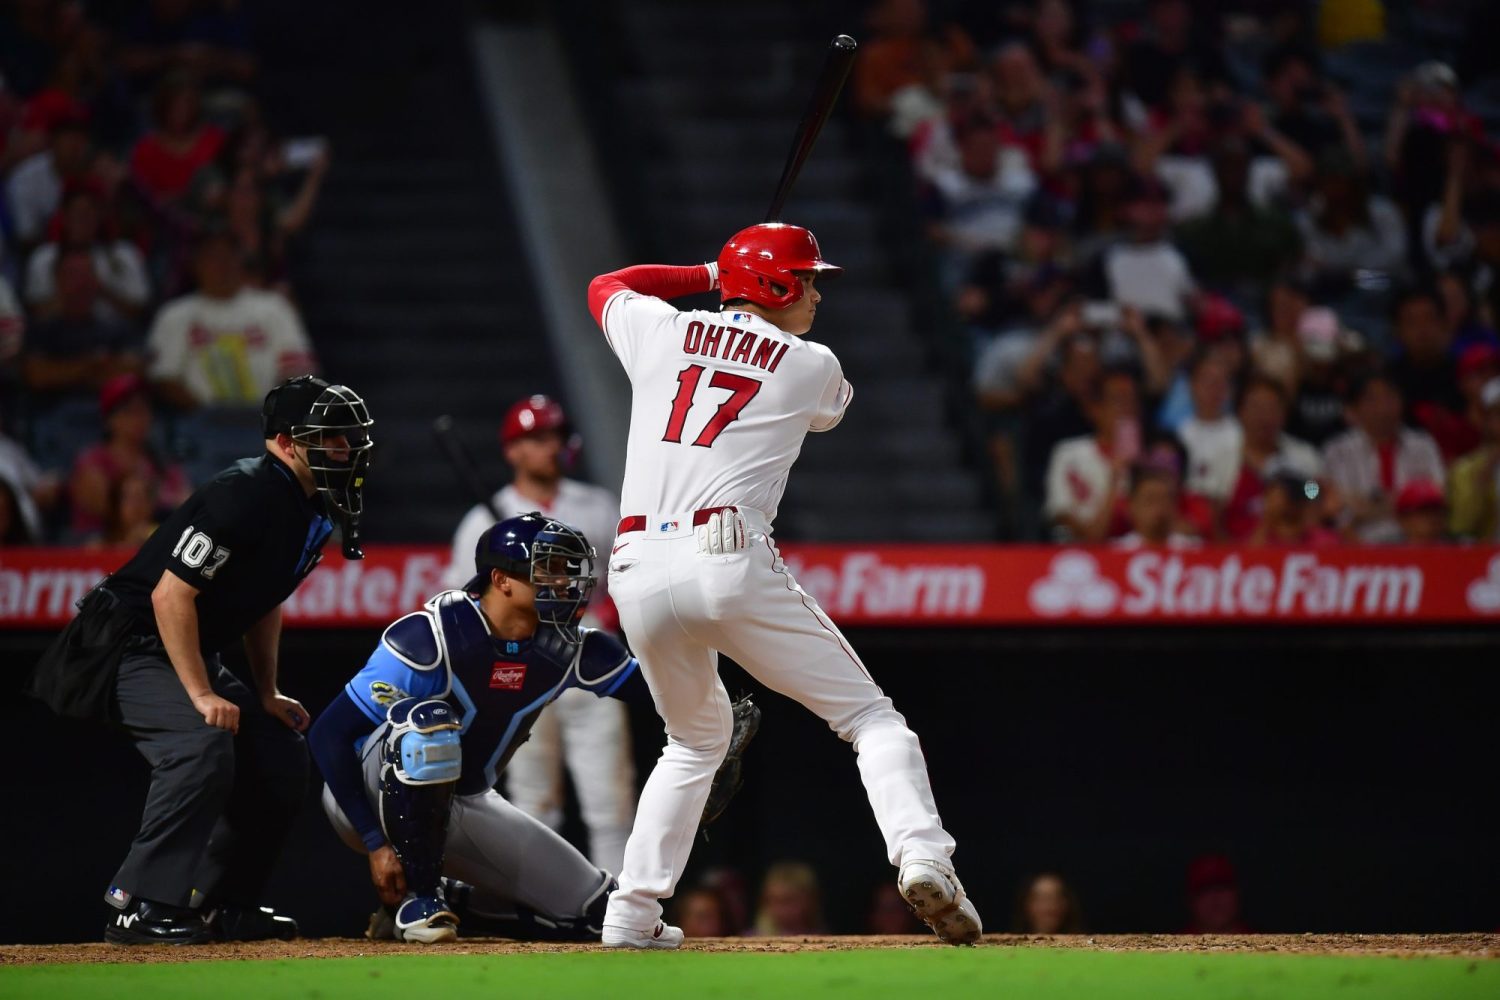 Los Angeles Angels designated hitter Shohei Ohtani hits against the Tampa Bay Rays during the sixth inning at Angel Stadium.